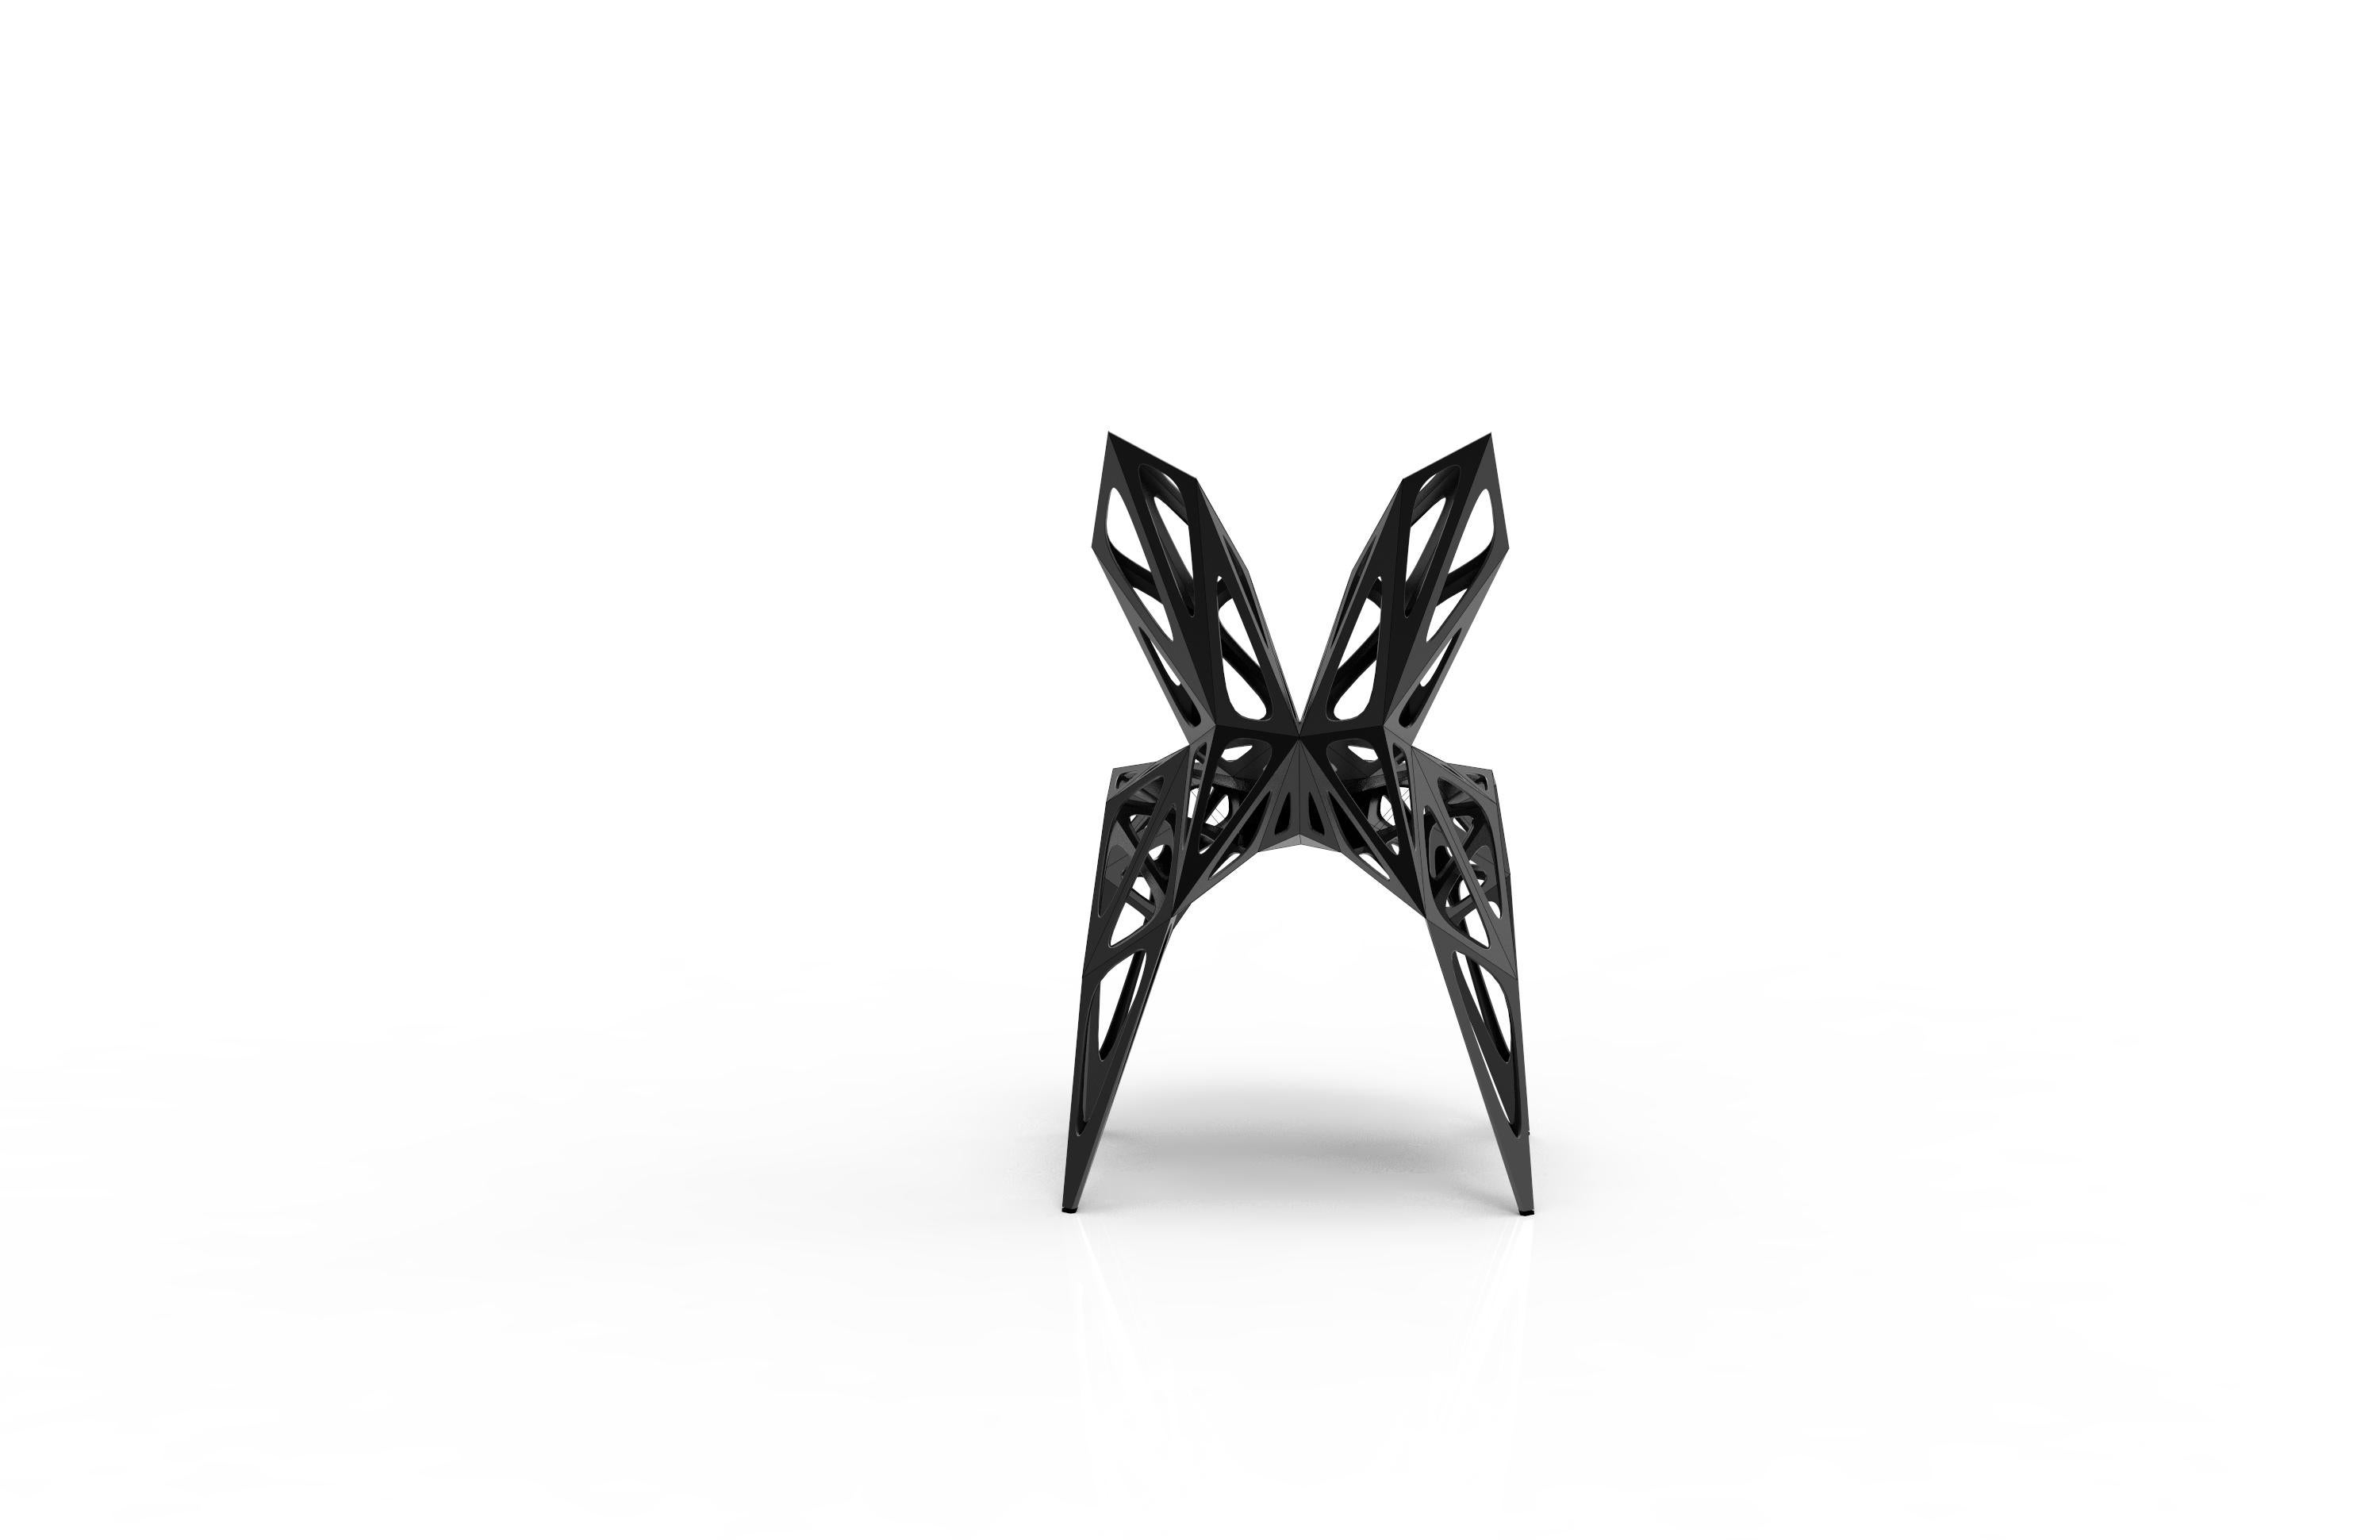 Chinese Mc09 Endless Form Chair Series Stainless Steel Customizable Black & Sliver For Sale